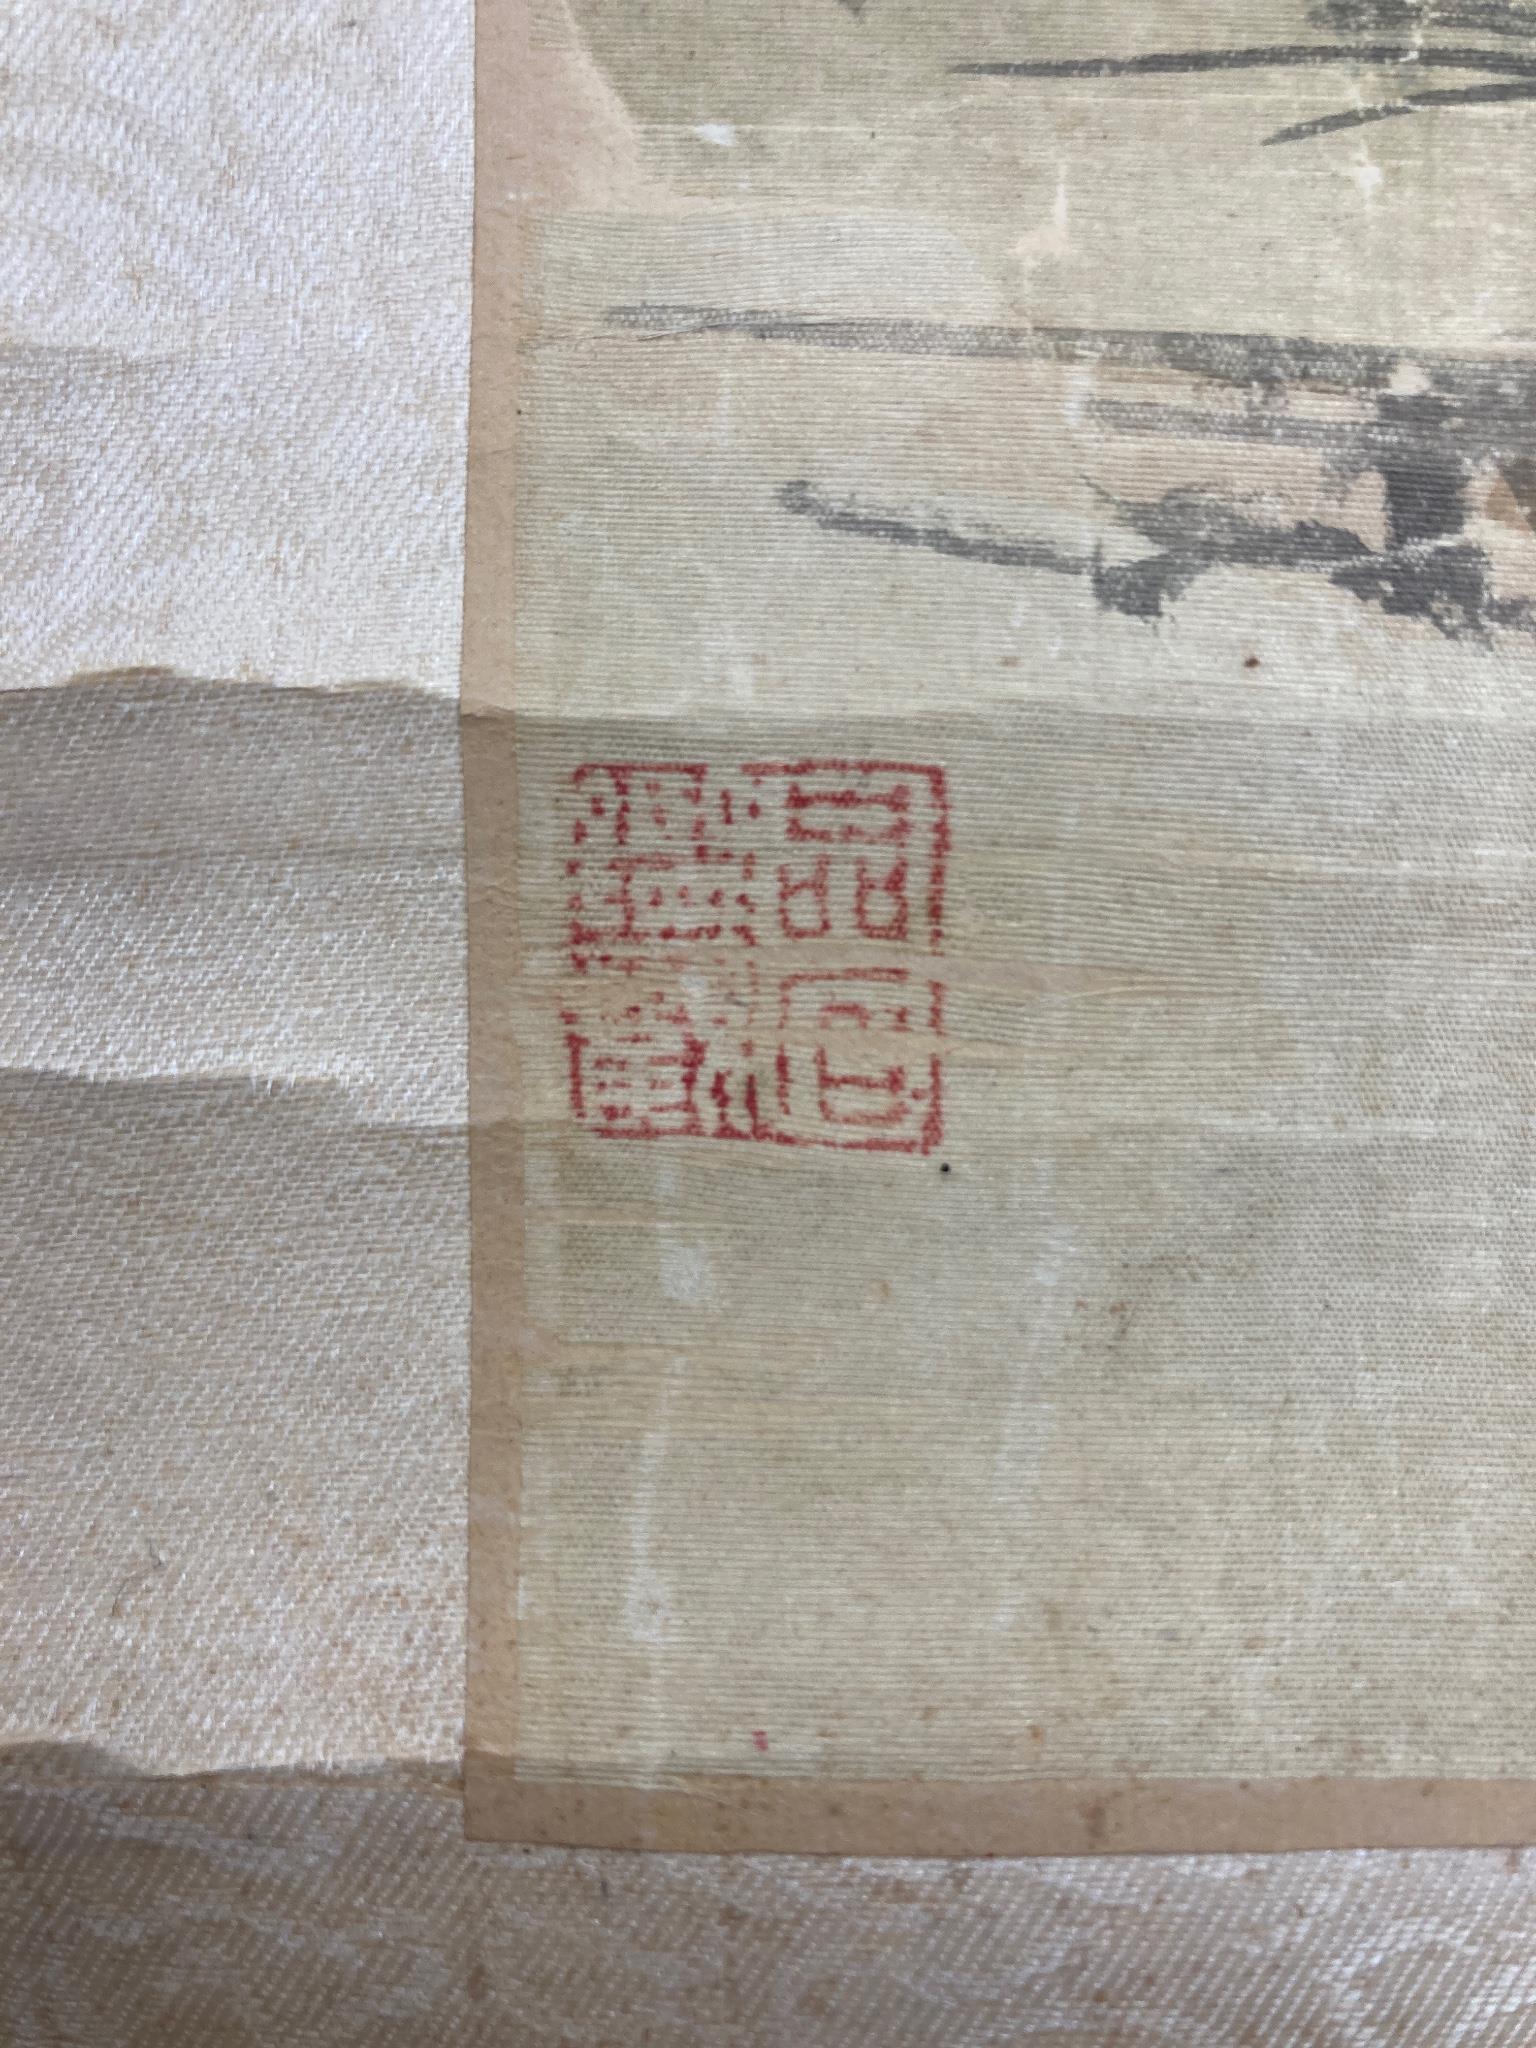 A Chinese landscape scroll painting on silk, Qing dynasty inscribed and signed, artist’s seal and collector’s seal lower left, image 139cm x 27.5cm, remounted